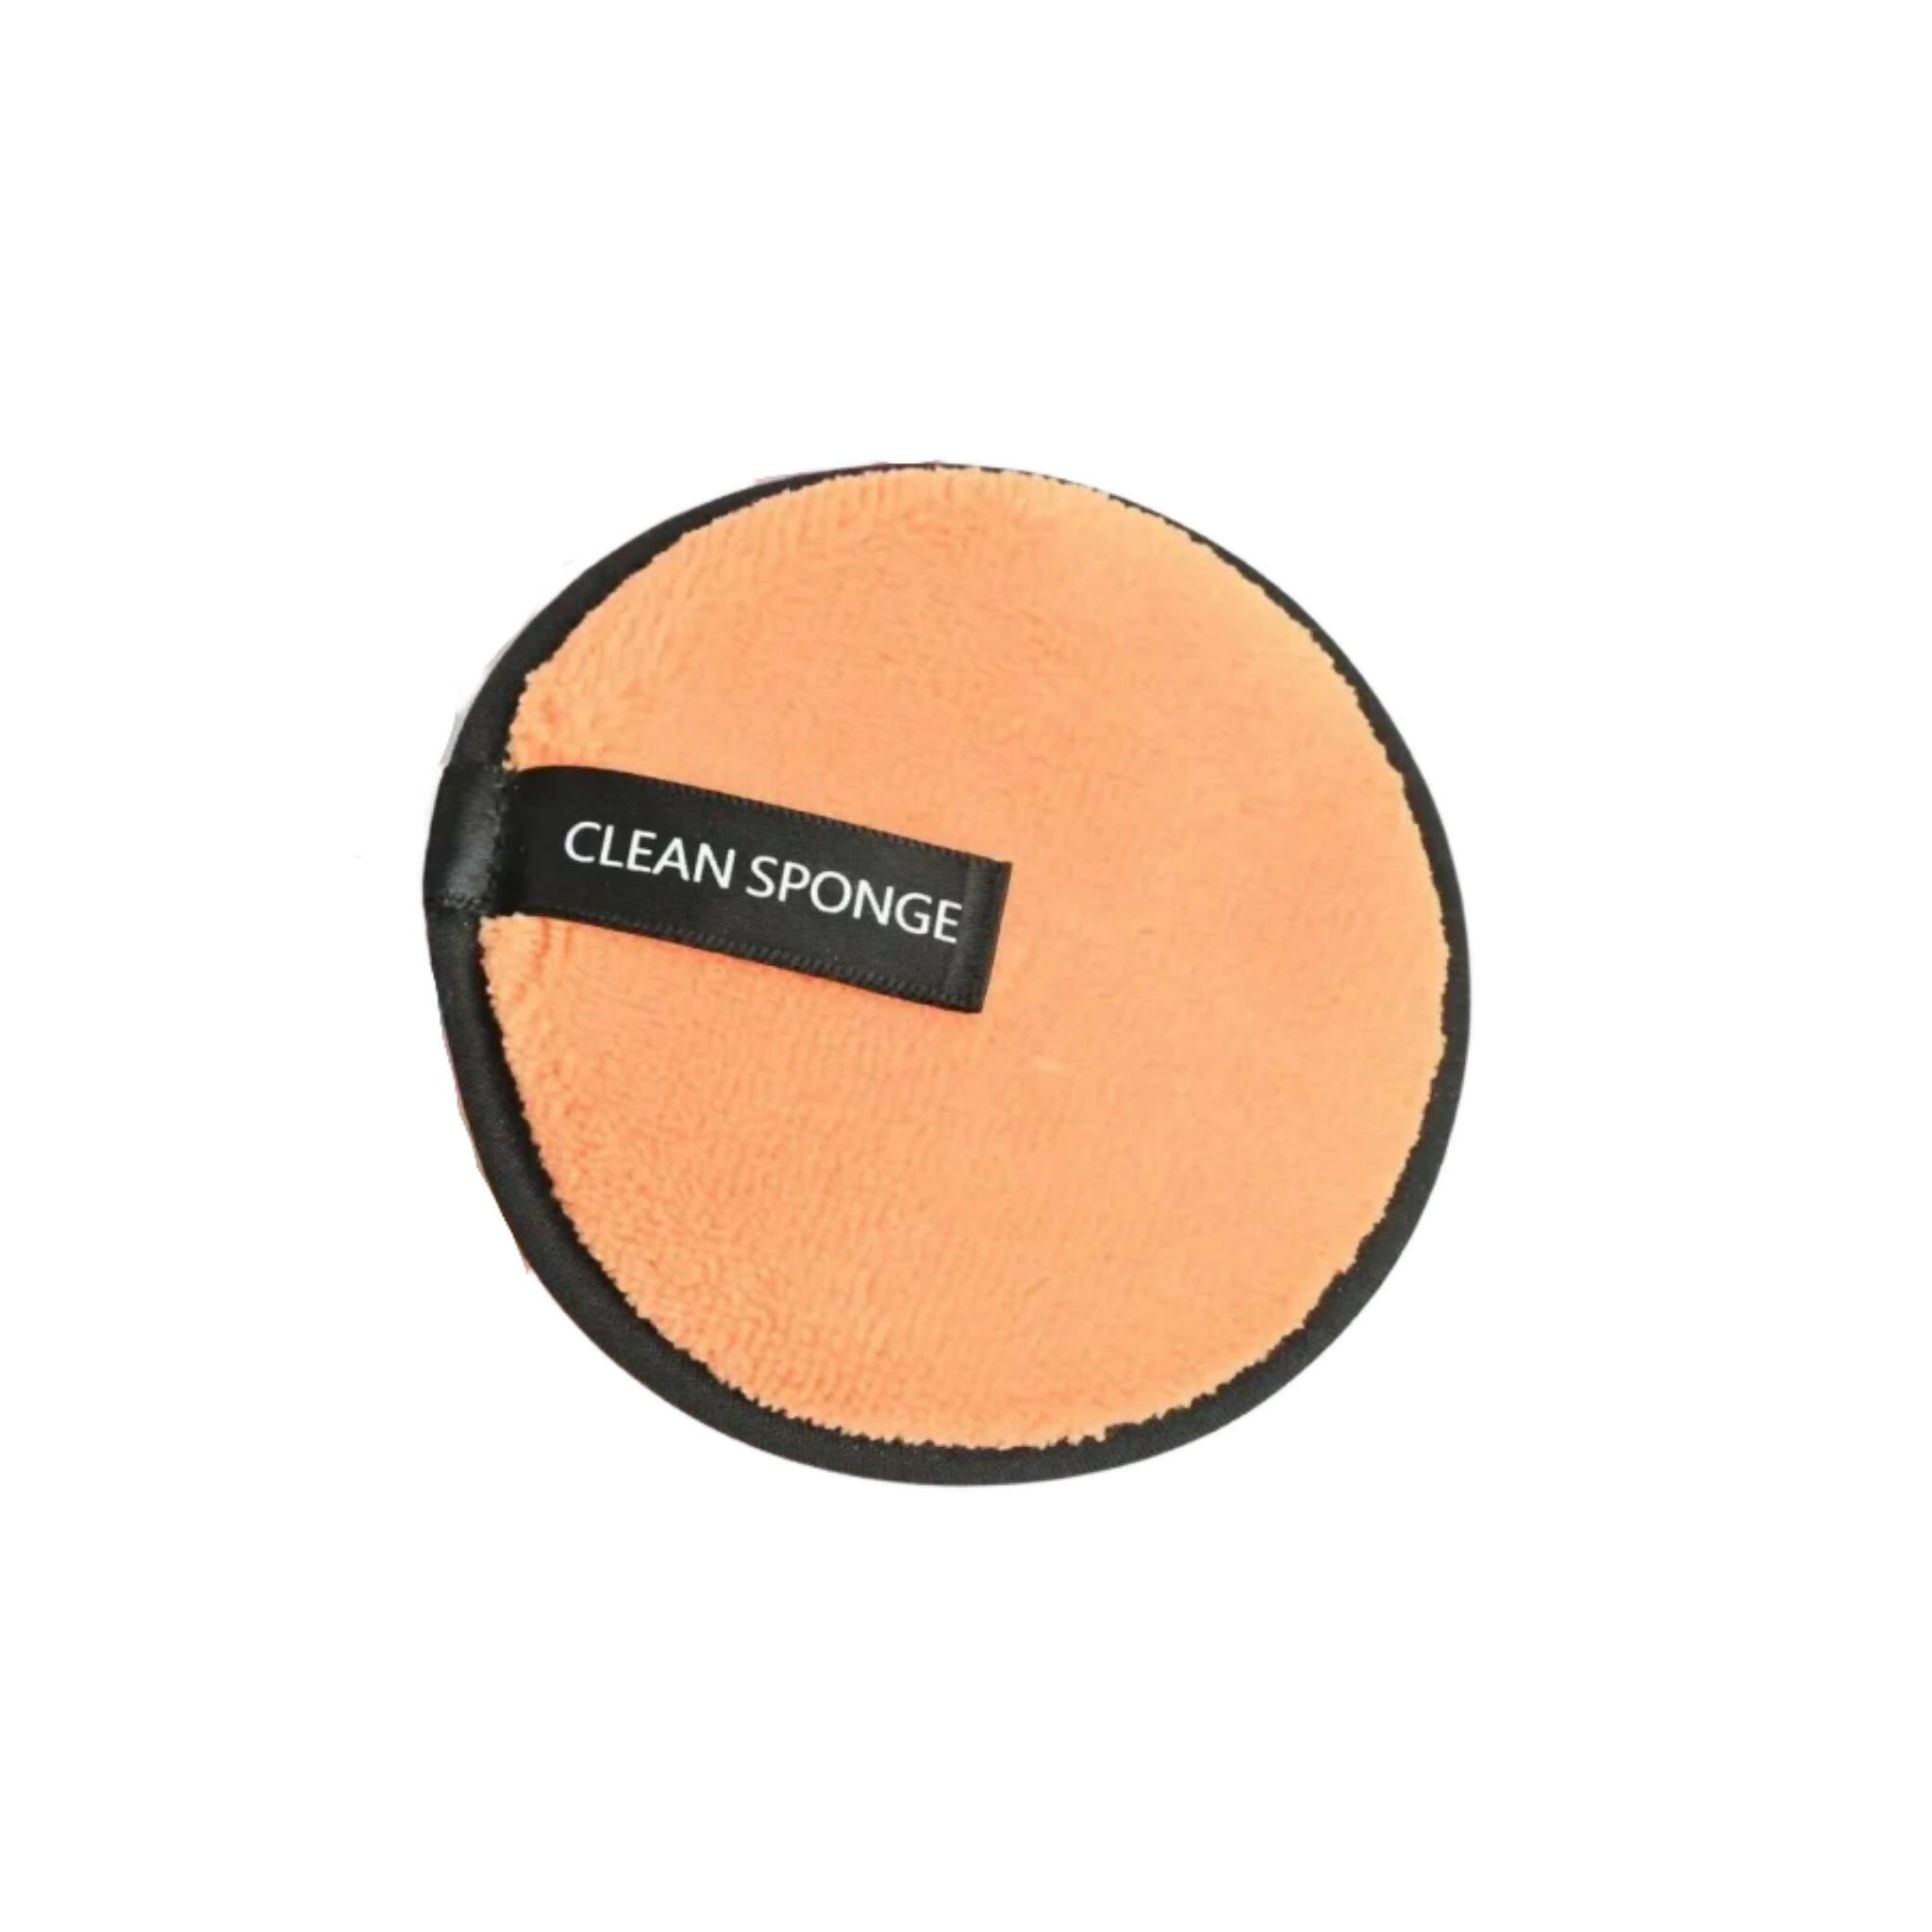 Makeup Remover Pads, Sponge Cotton & Cleaning Pads Tool